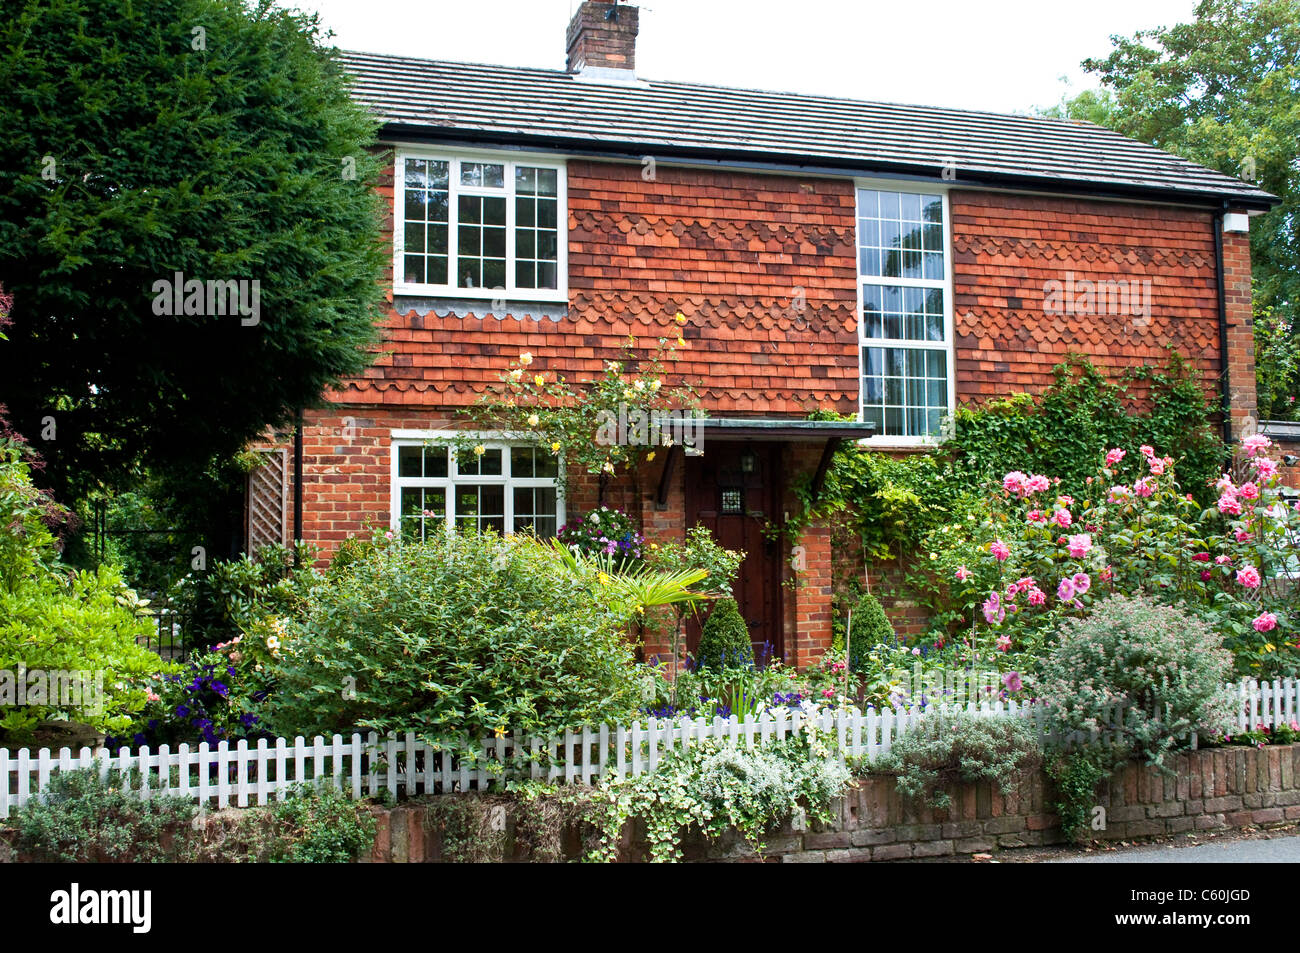 House with red brick facade and flower garden, Bray, Berkshire, England, UK Stock Photo